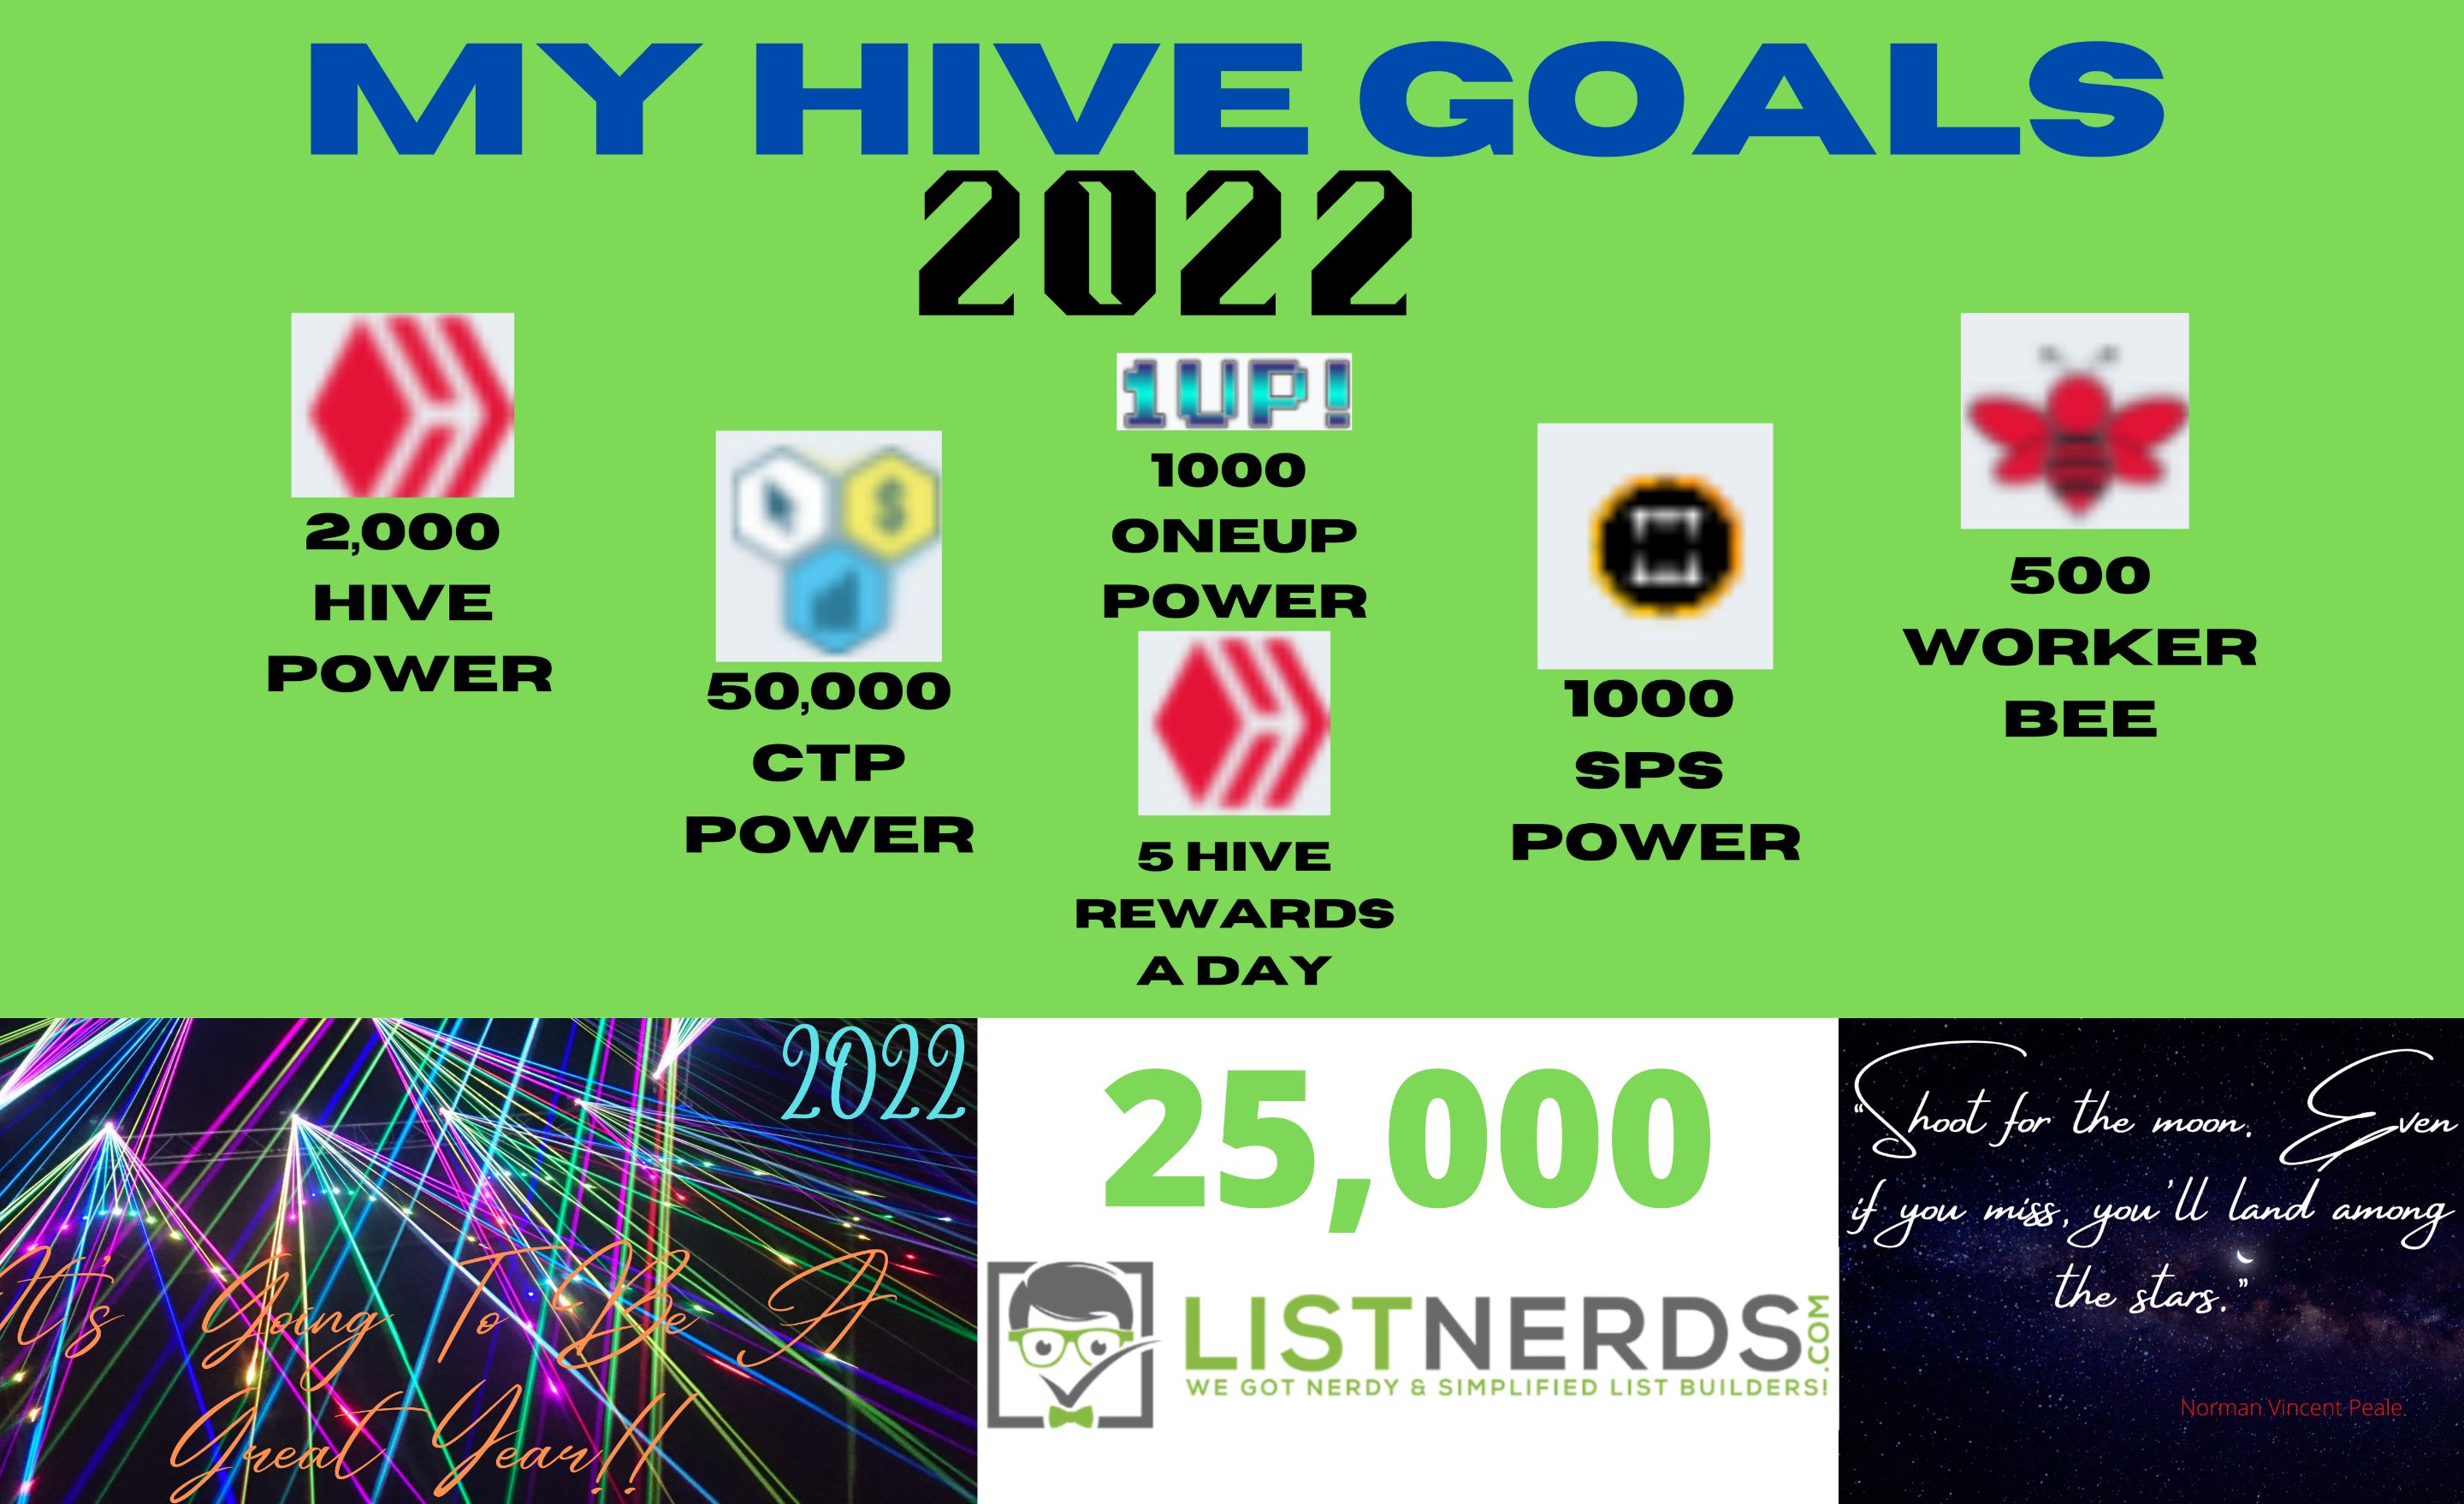 @successchar/my-hive-goals-2022-or-down-for-10-days-is-no-fun